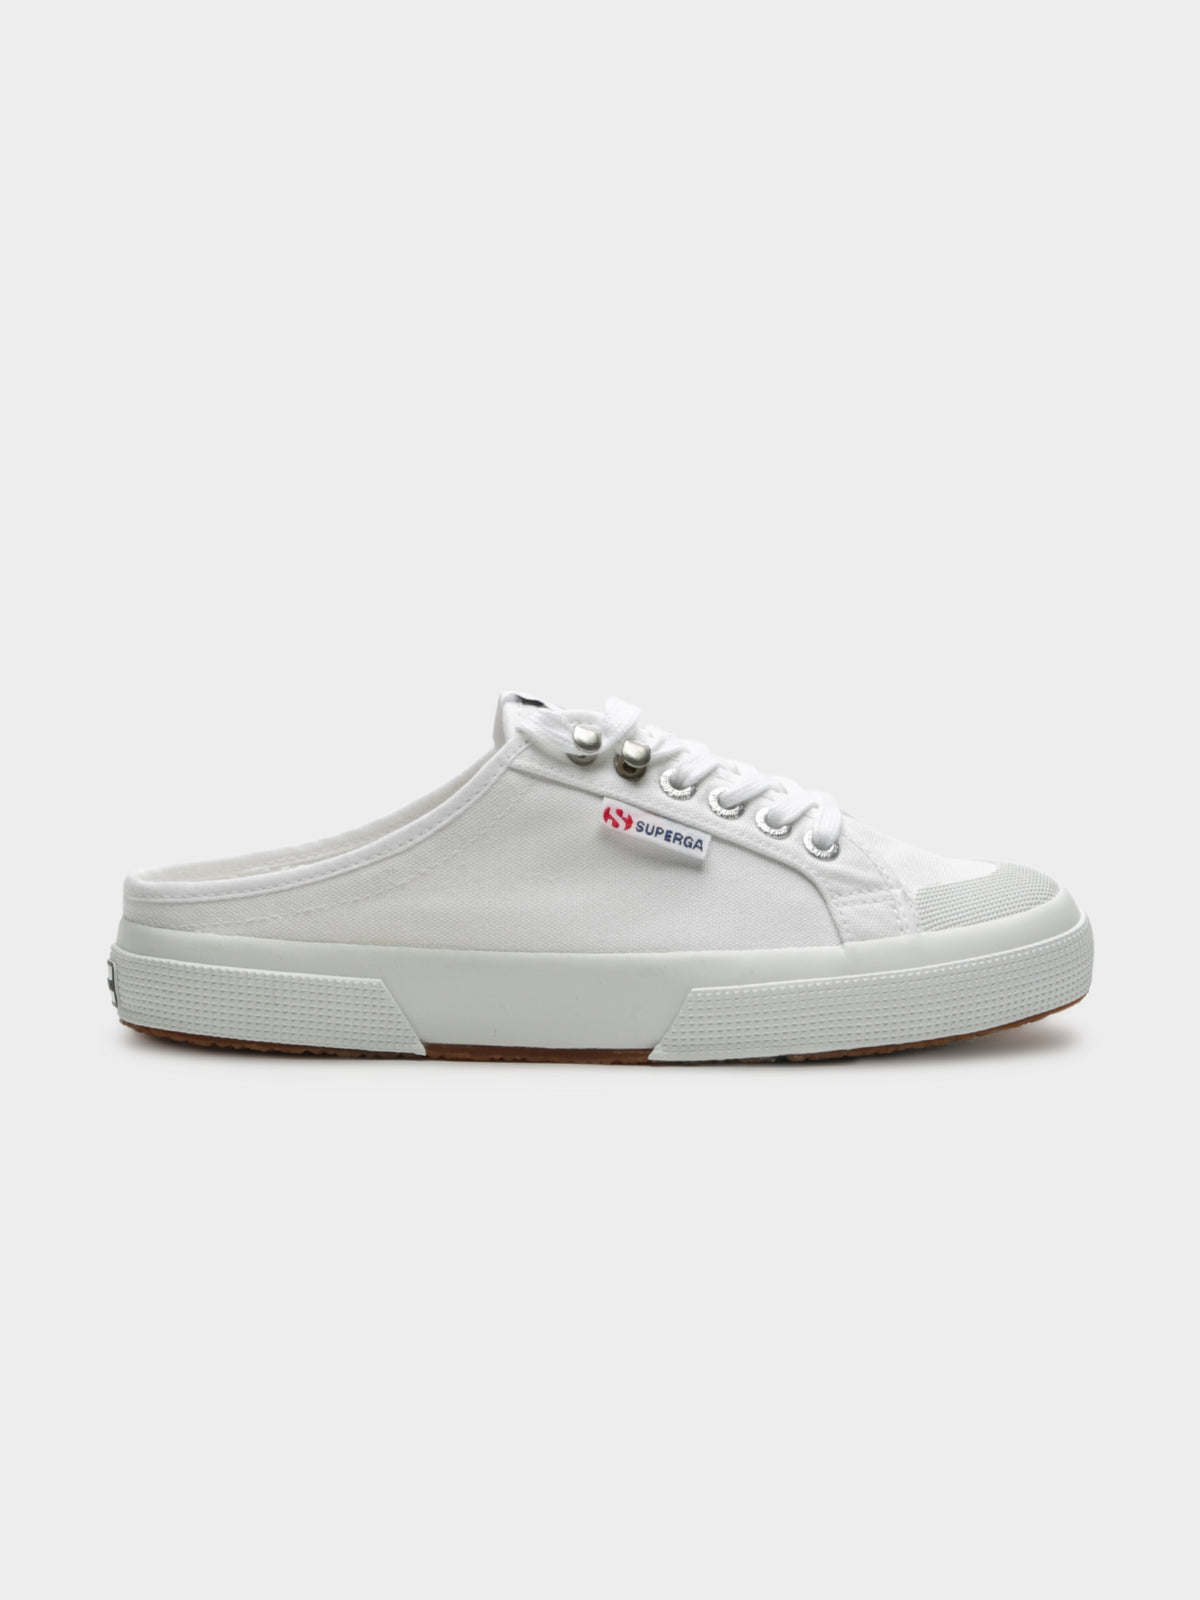 Alexa Chung 2292 Cot Hook Sneakers in White